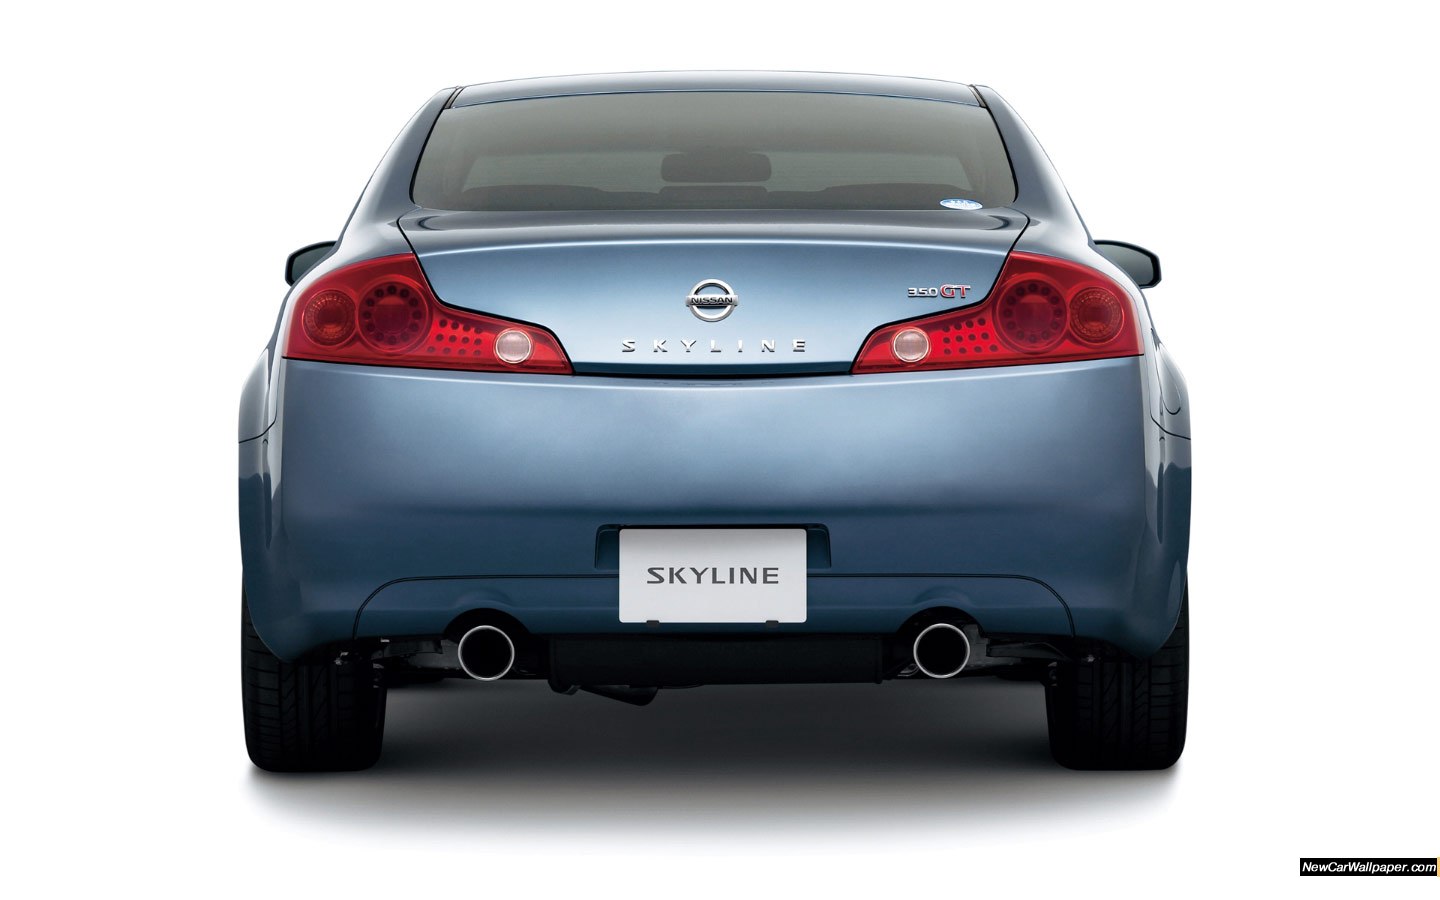 Nissan skyline 350gt coupe review #2